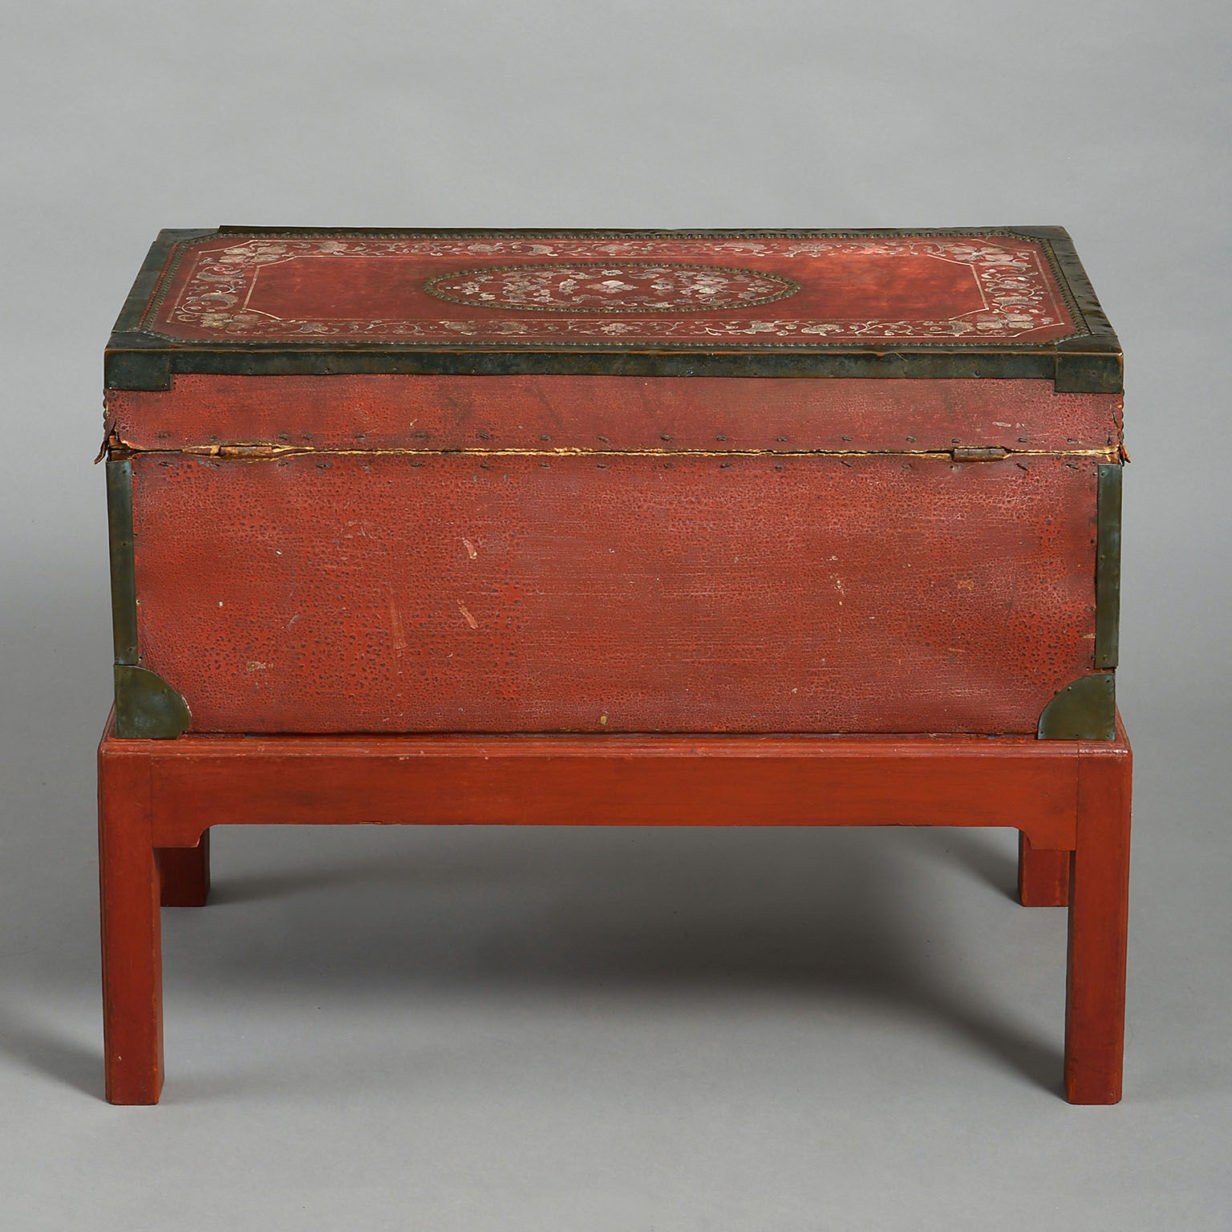 18th century chinese export painted leather trunk